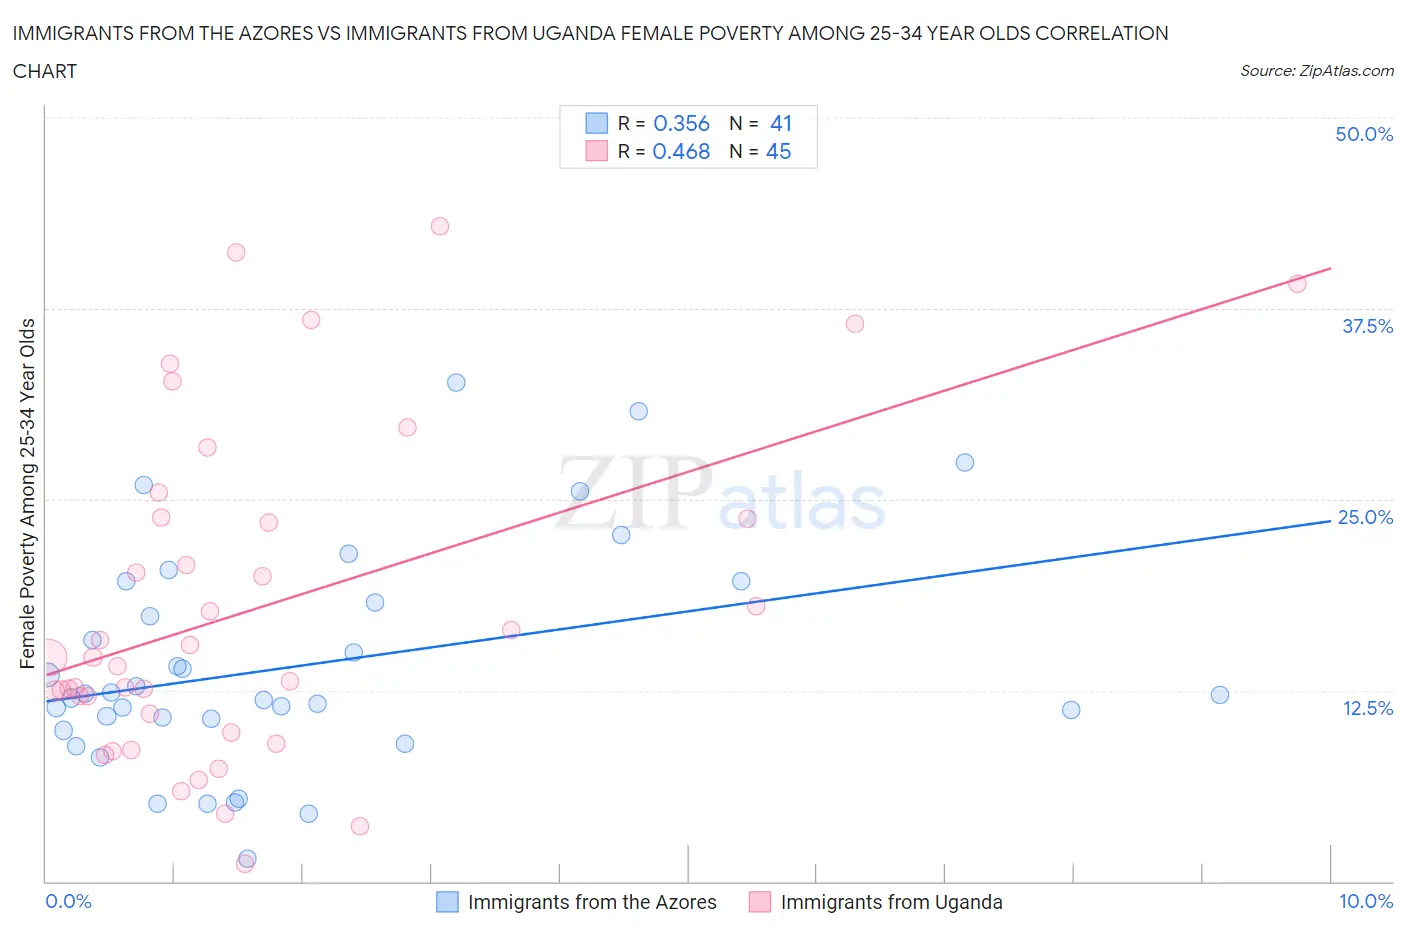 Immigrants from the Azores vs Immigrants from Uganda Female Poverty Among 25-34 Year Olds